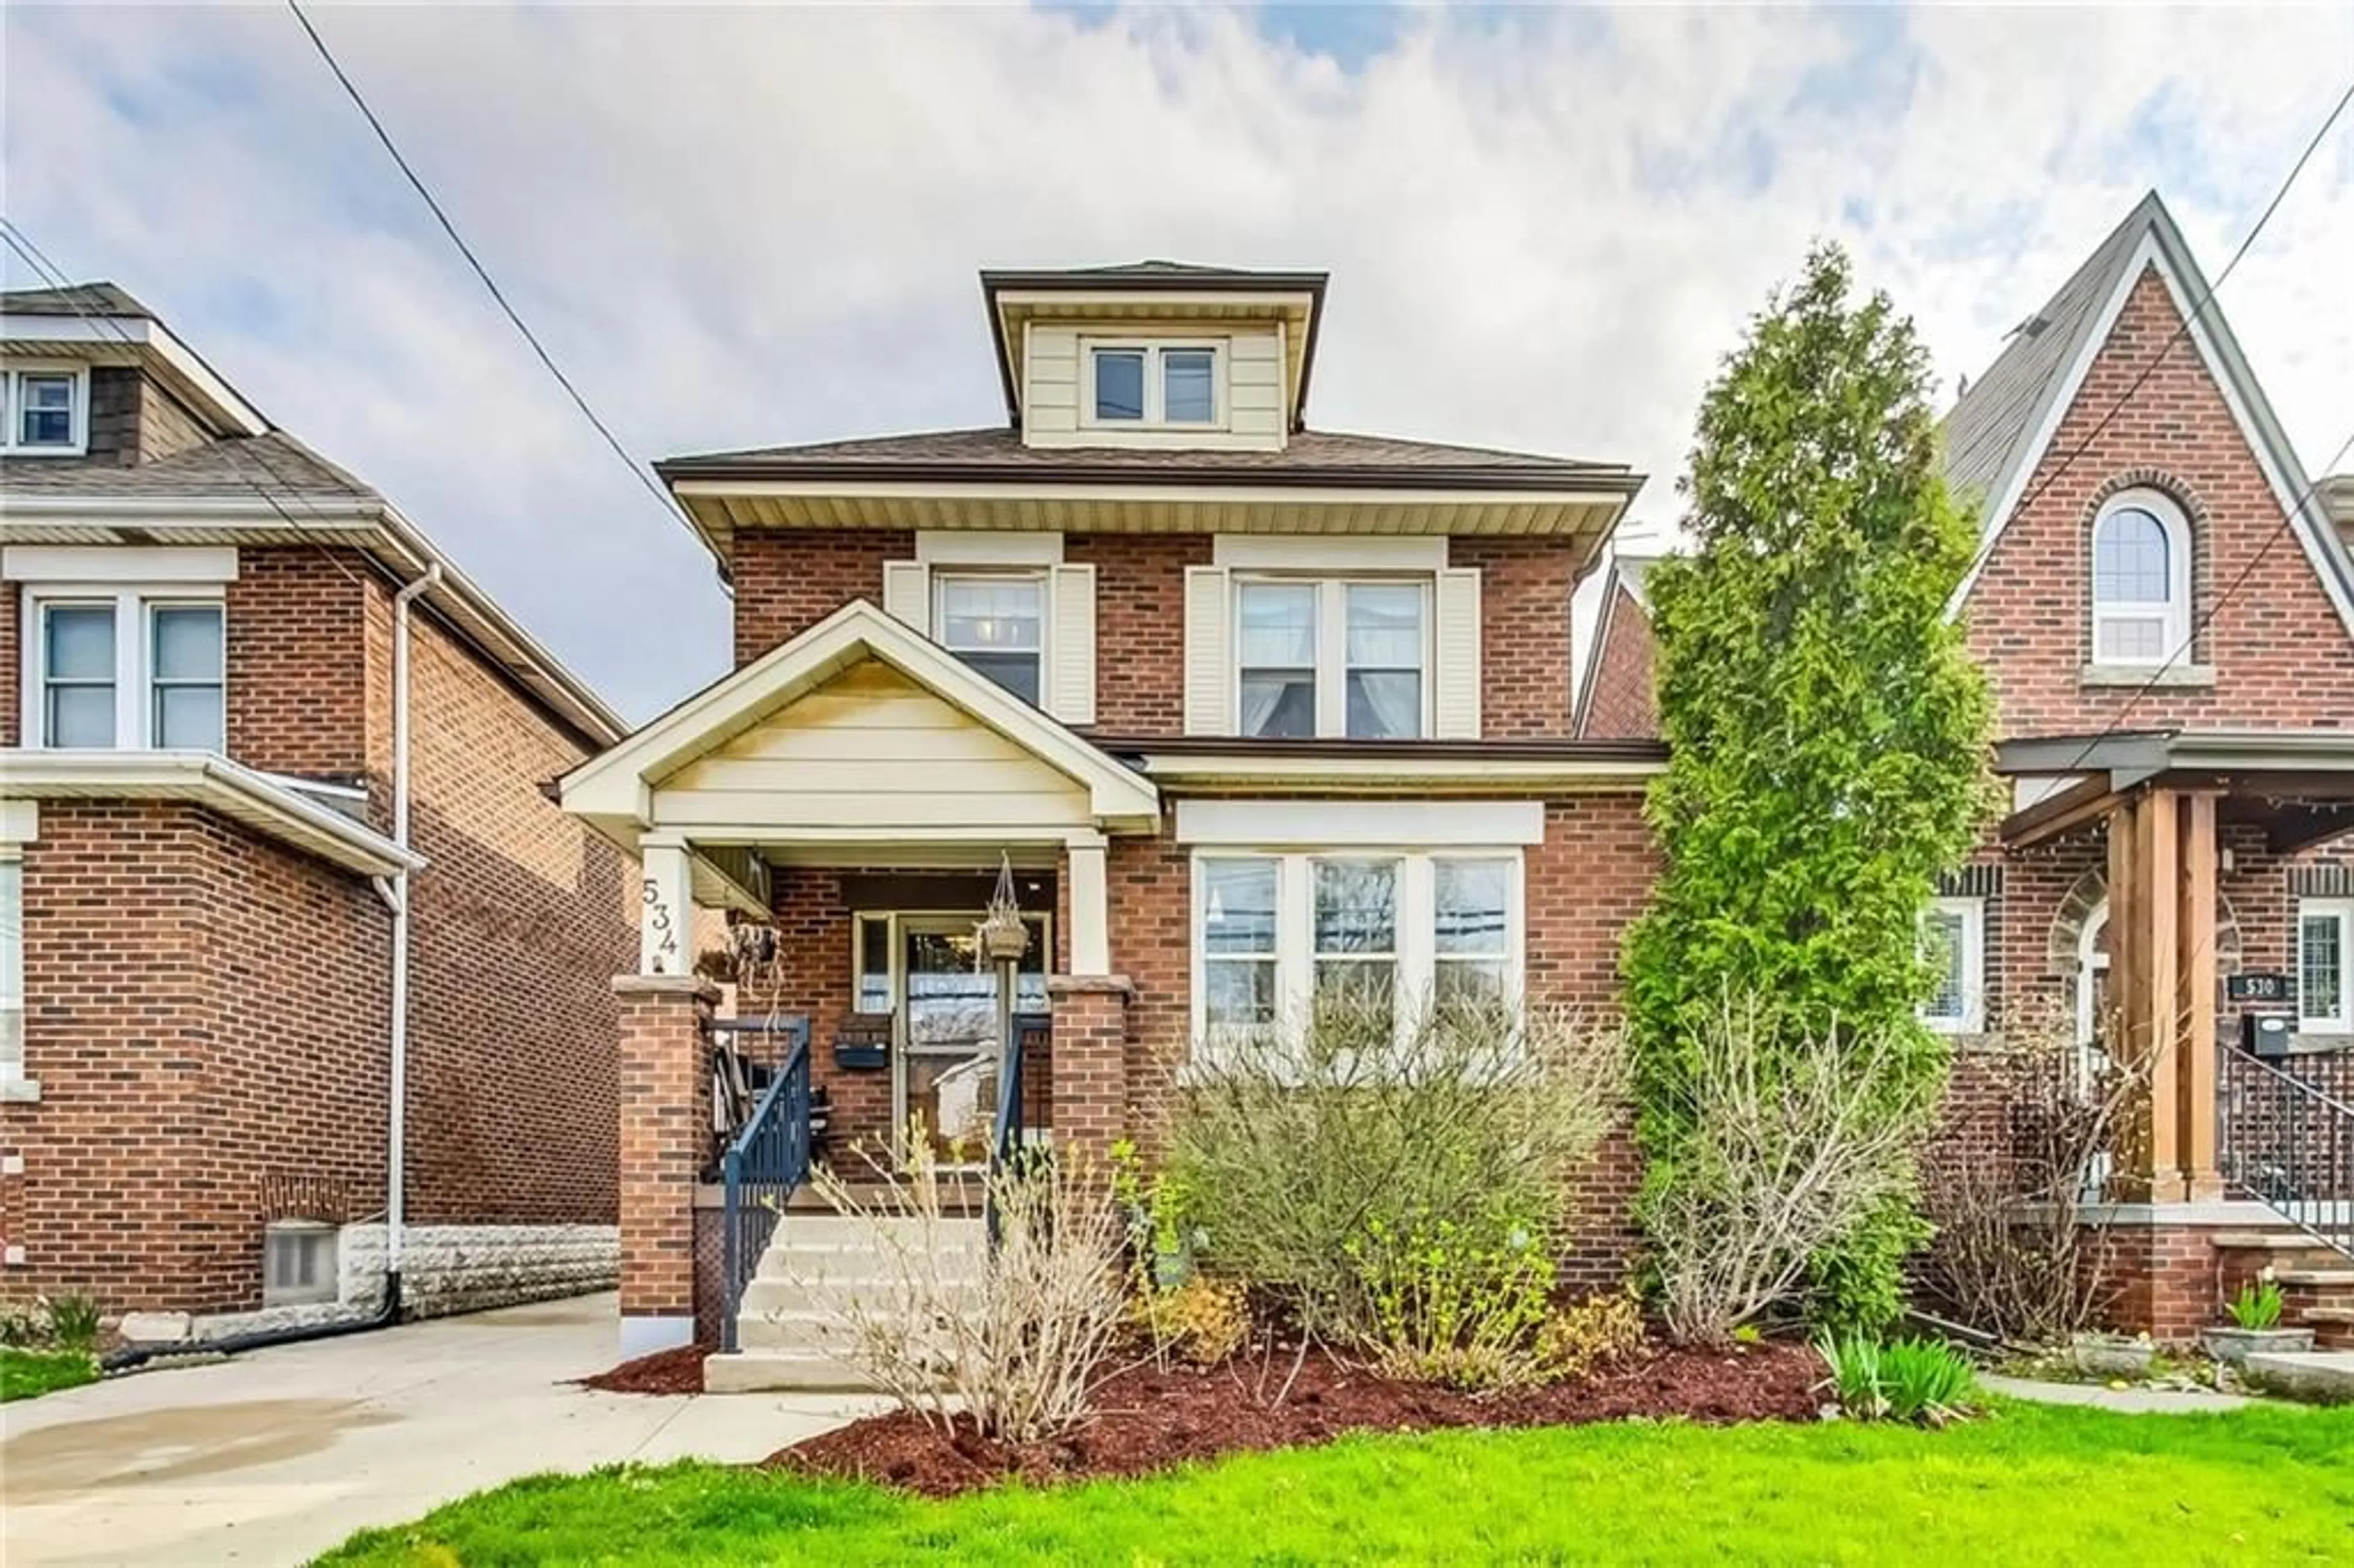 Home with brick exterior material for 534 Maple Ave, Hamilton Ontario L8K 1K9